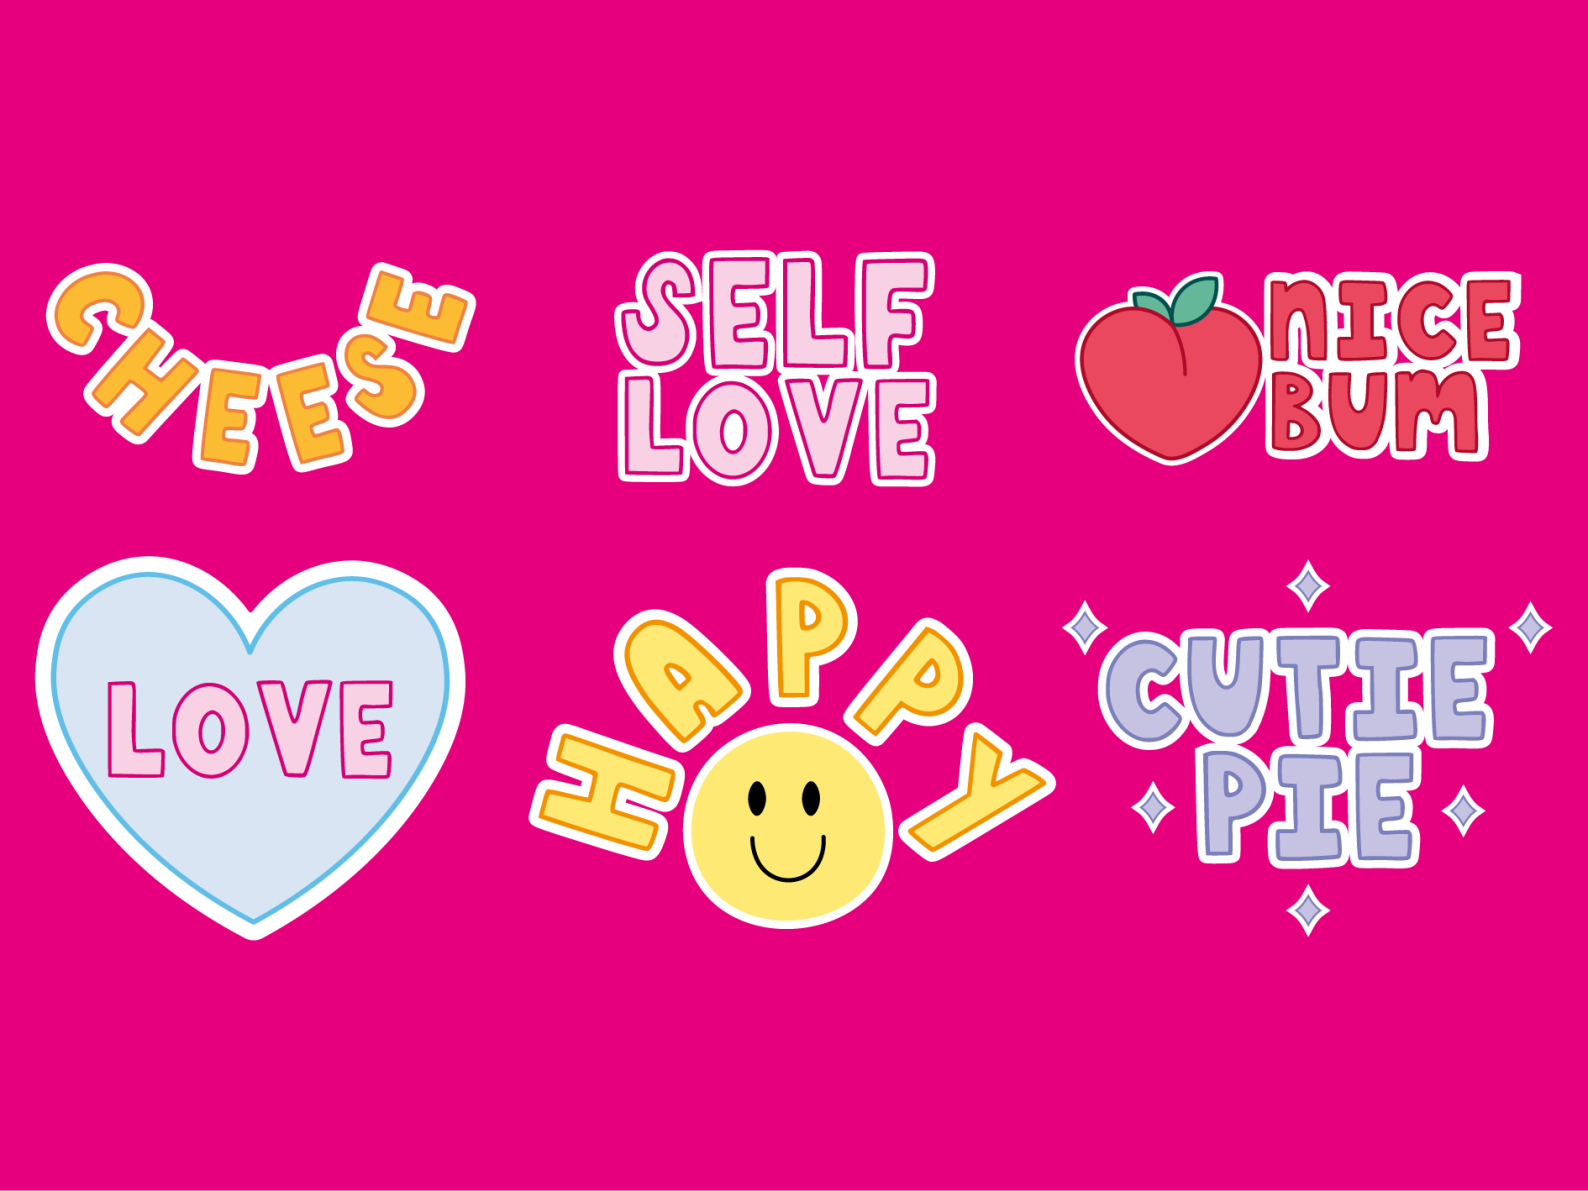 Cute Stickers by Sophie Brown on Dribbble